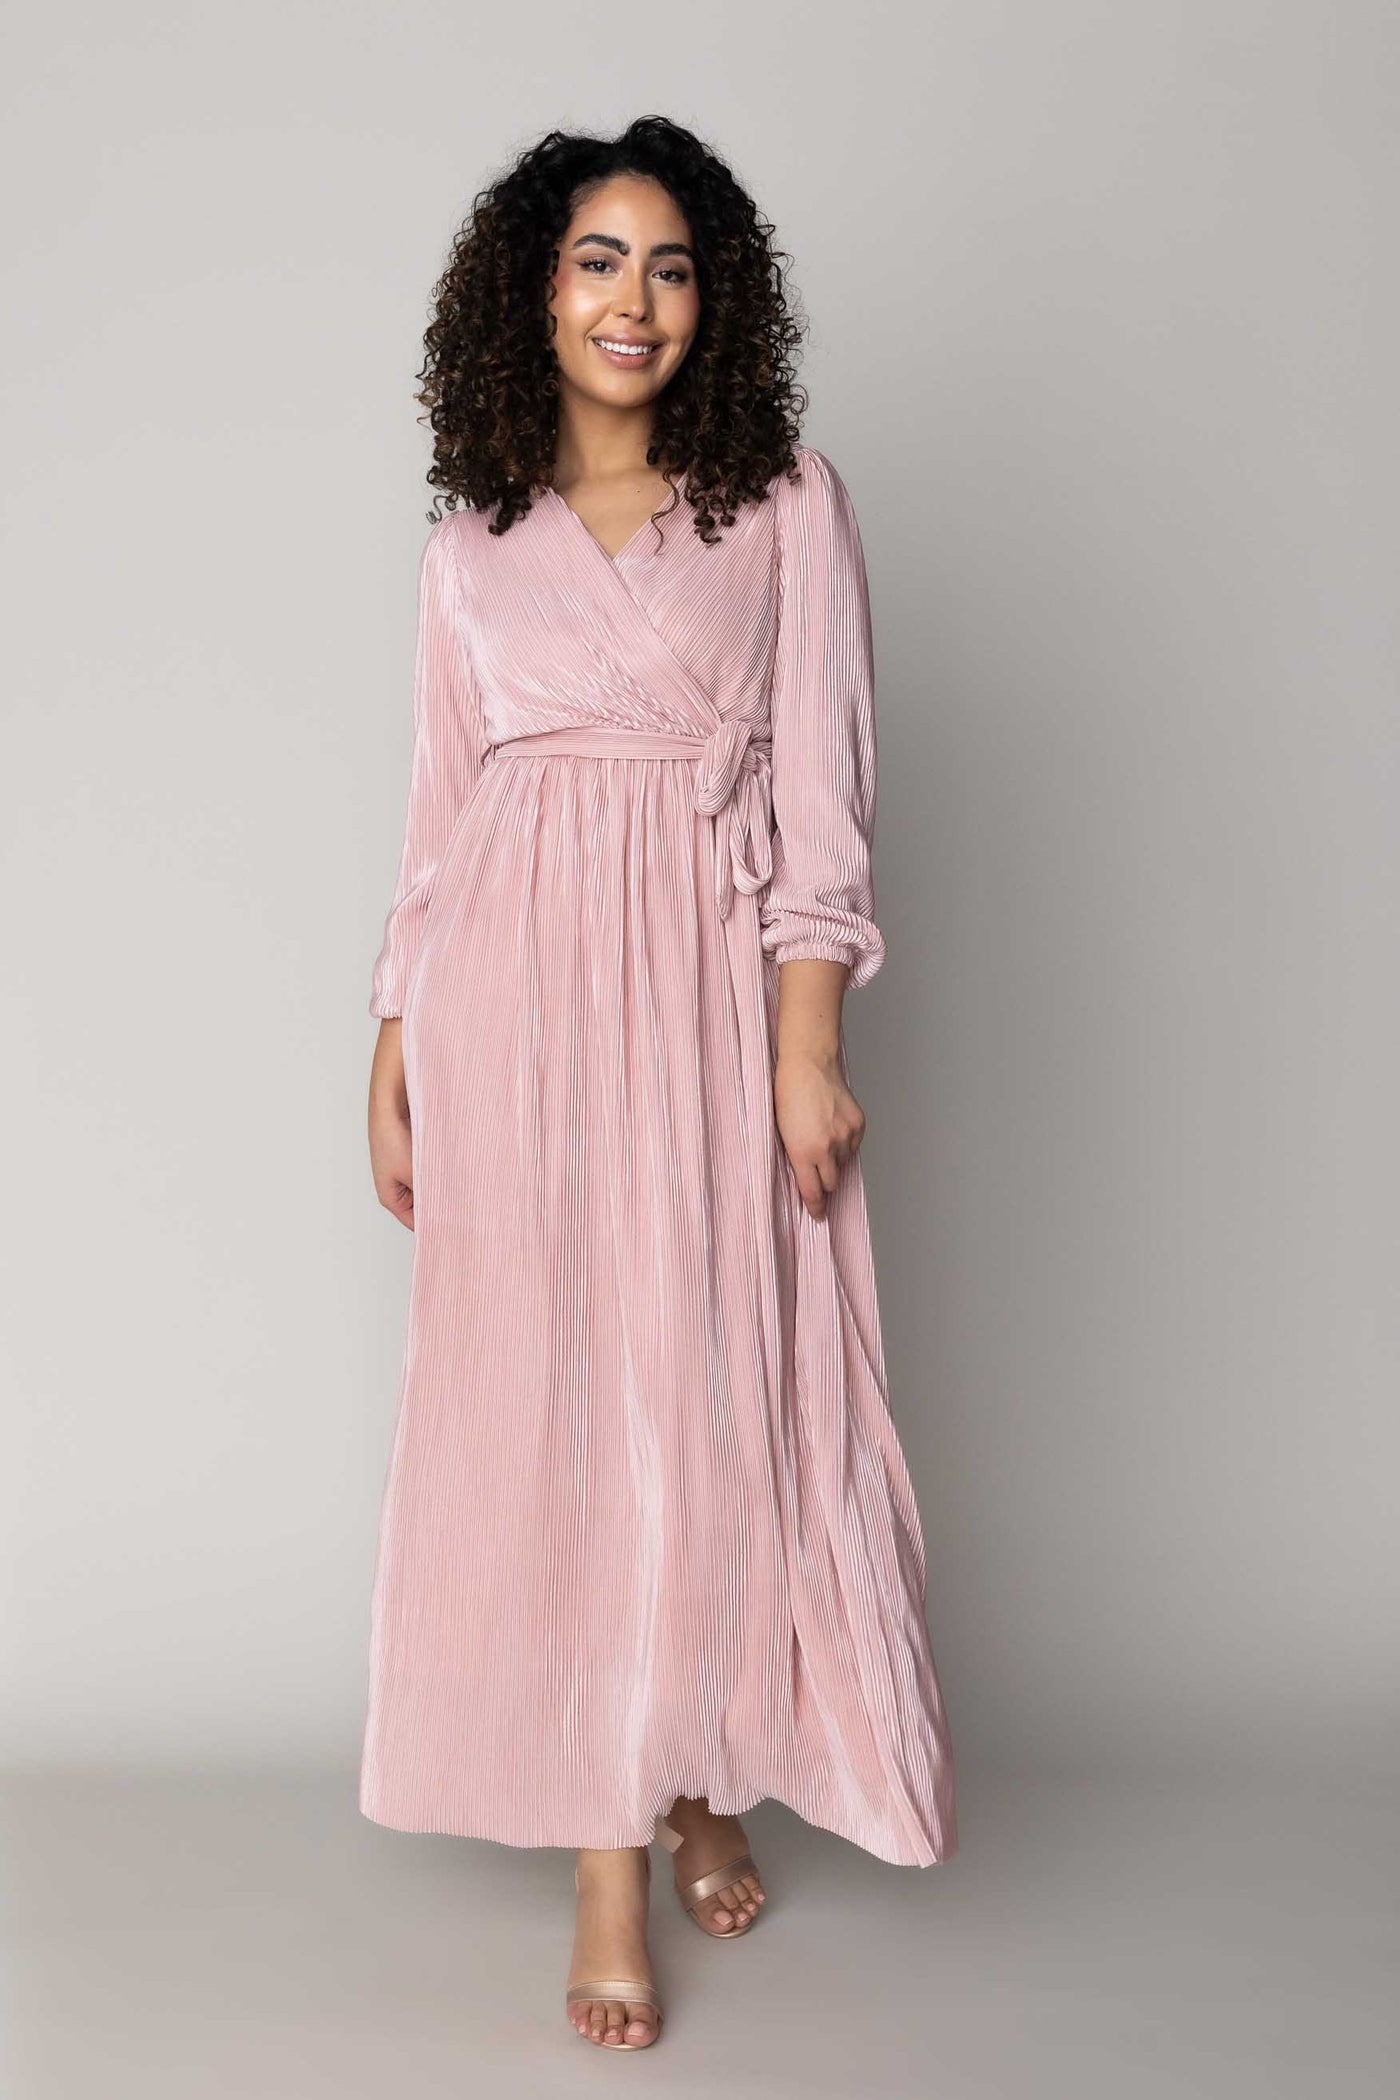 This is a modest dress with ribbed details and a tie around the waist.